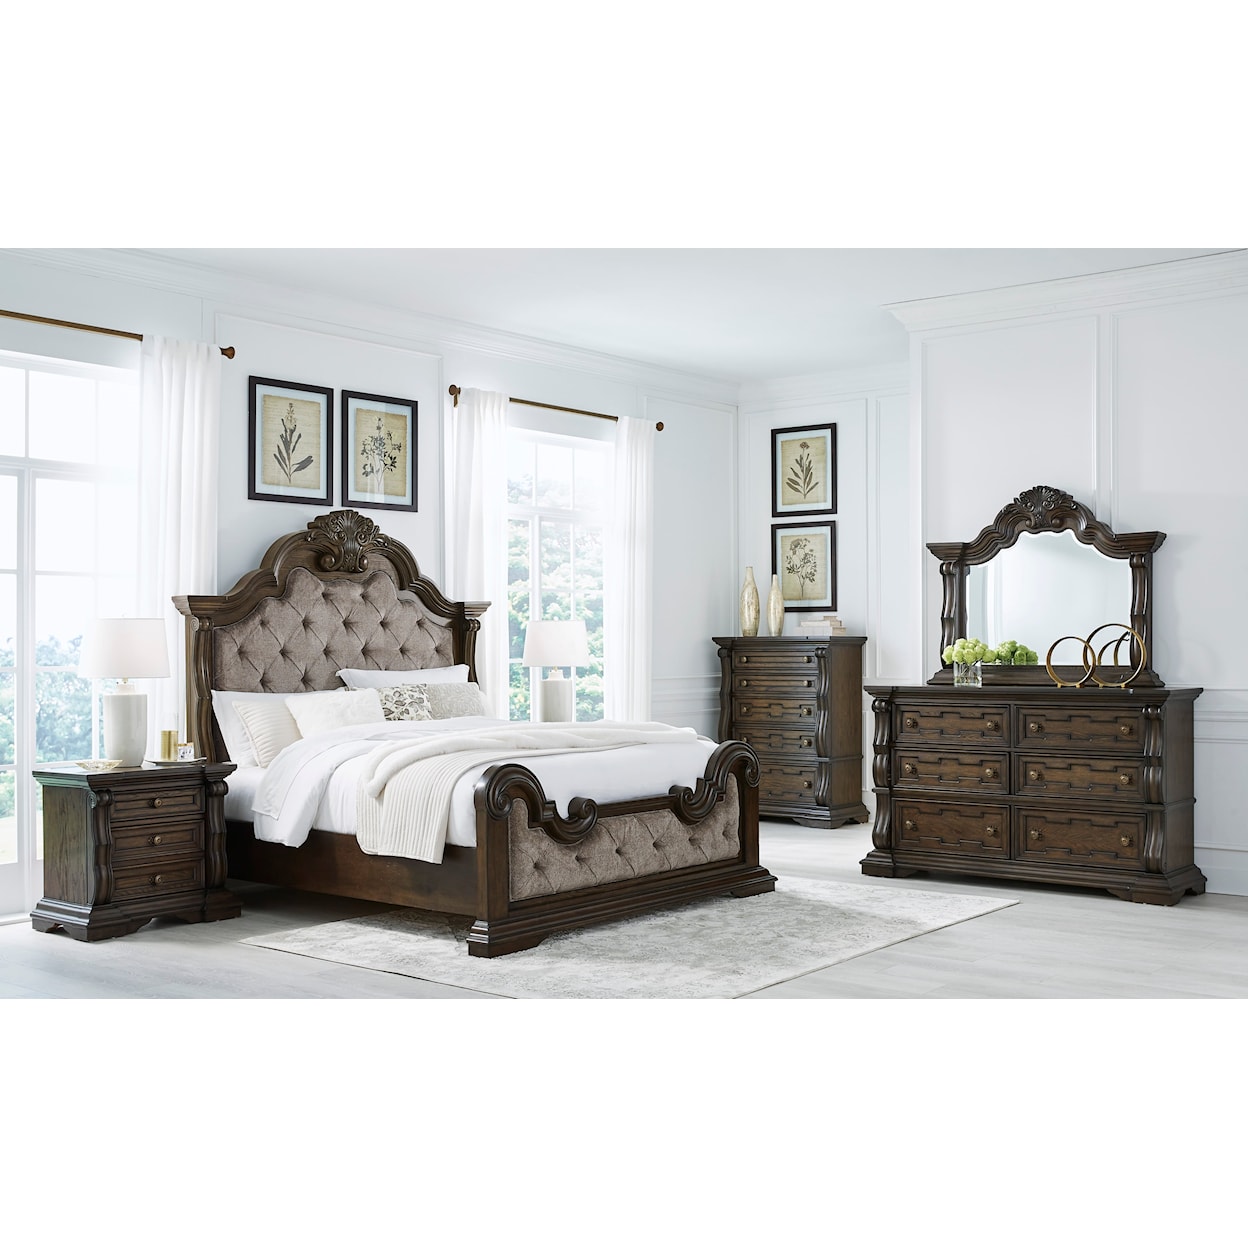 Signature Design by Ashley Maylee Queen Bedroom Set